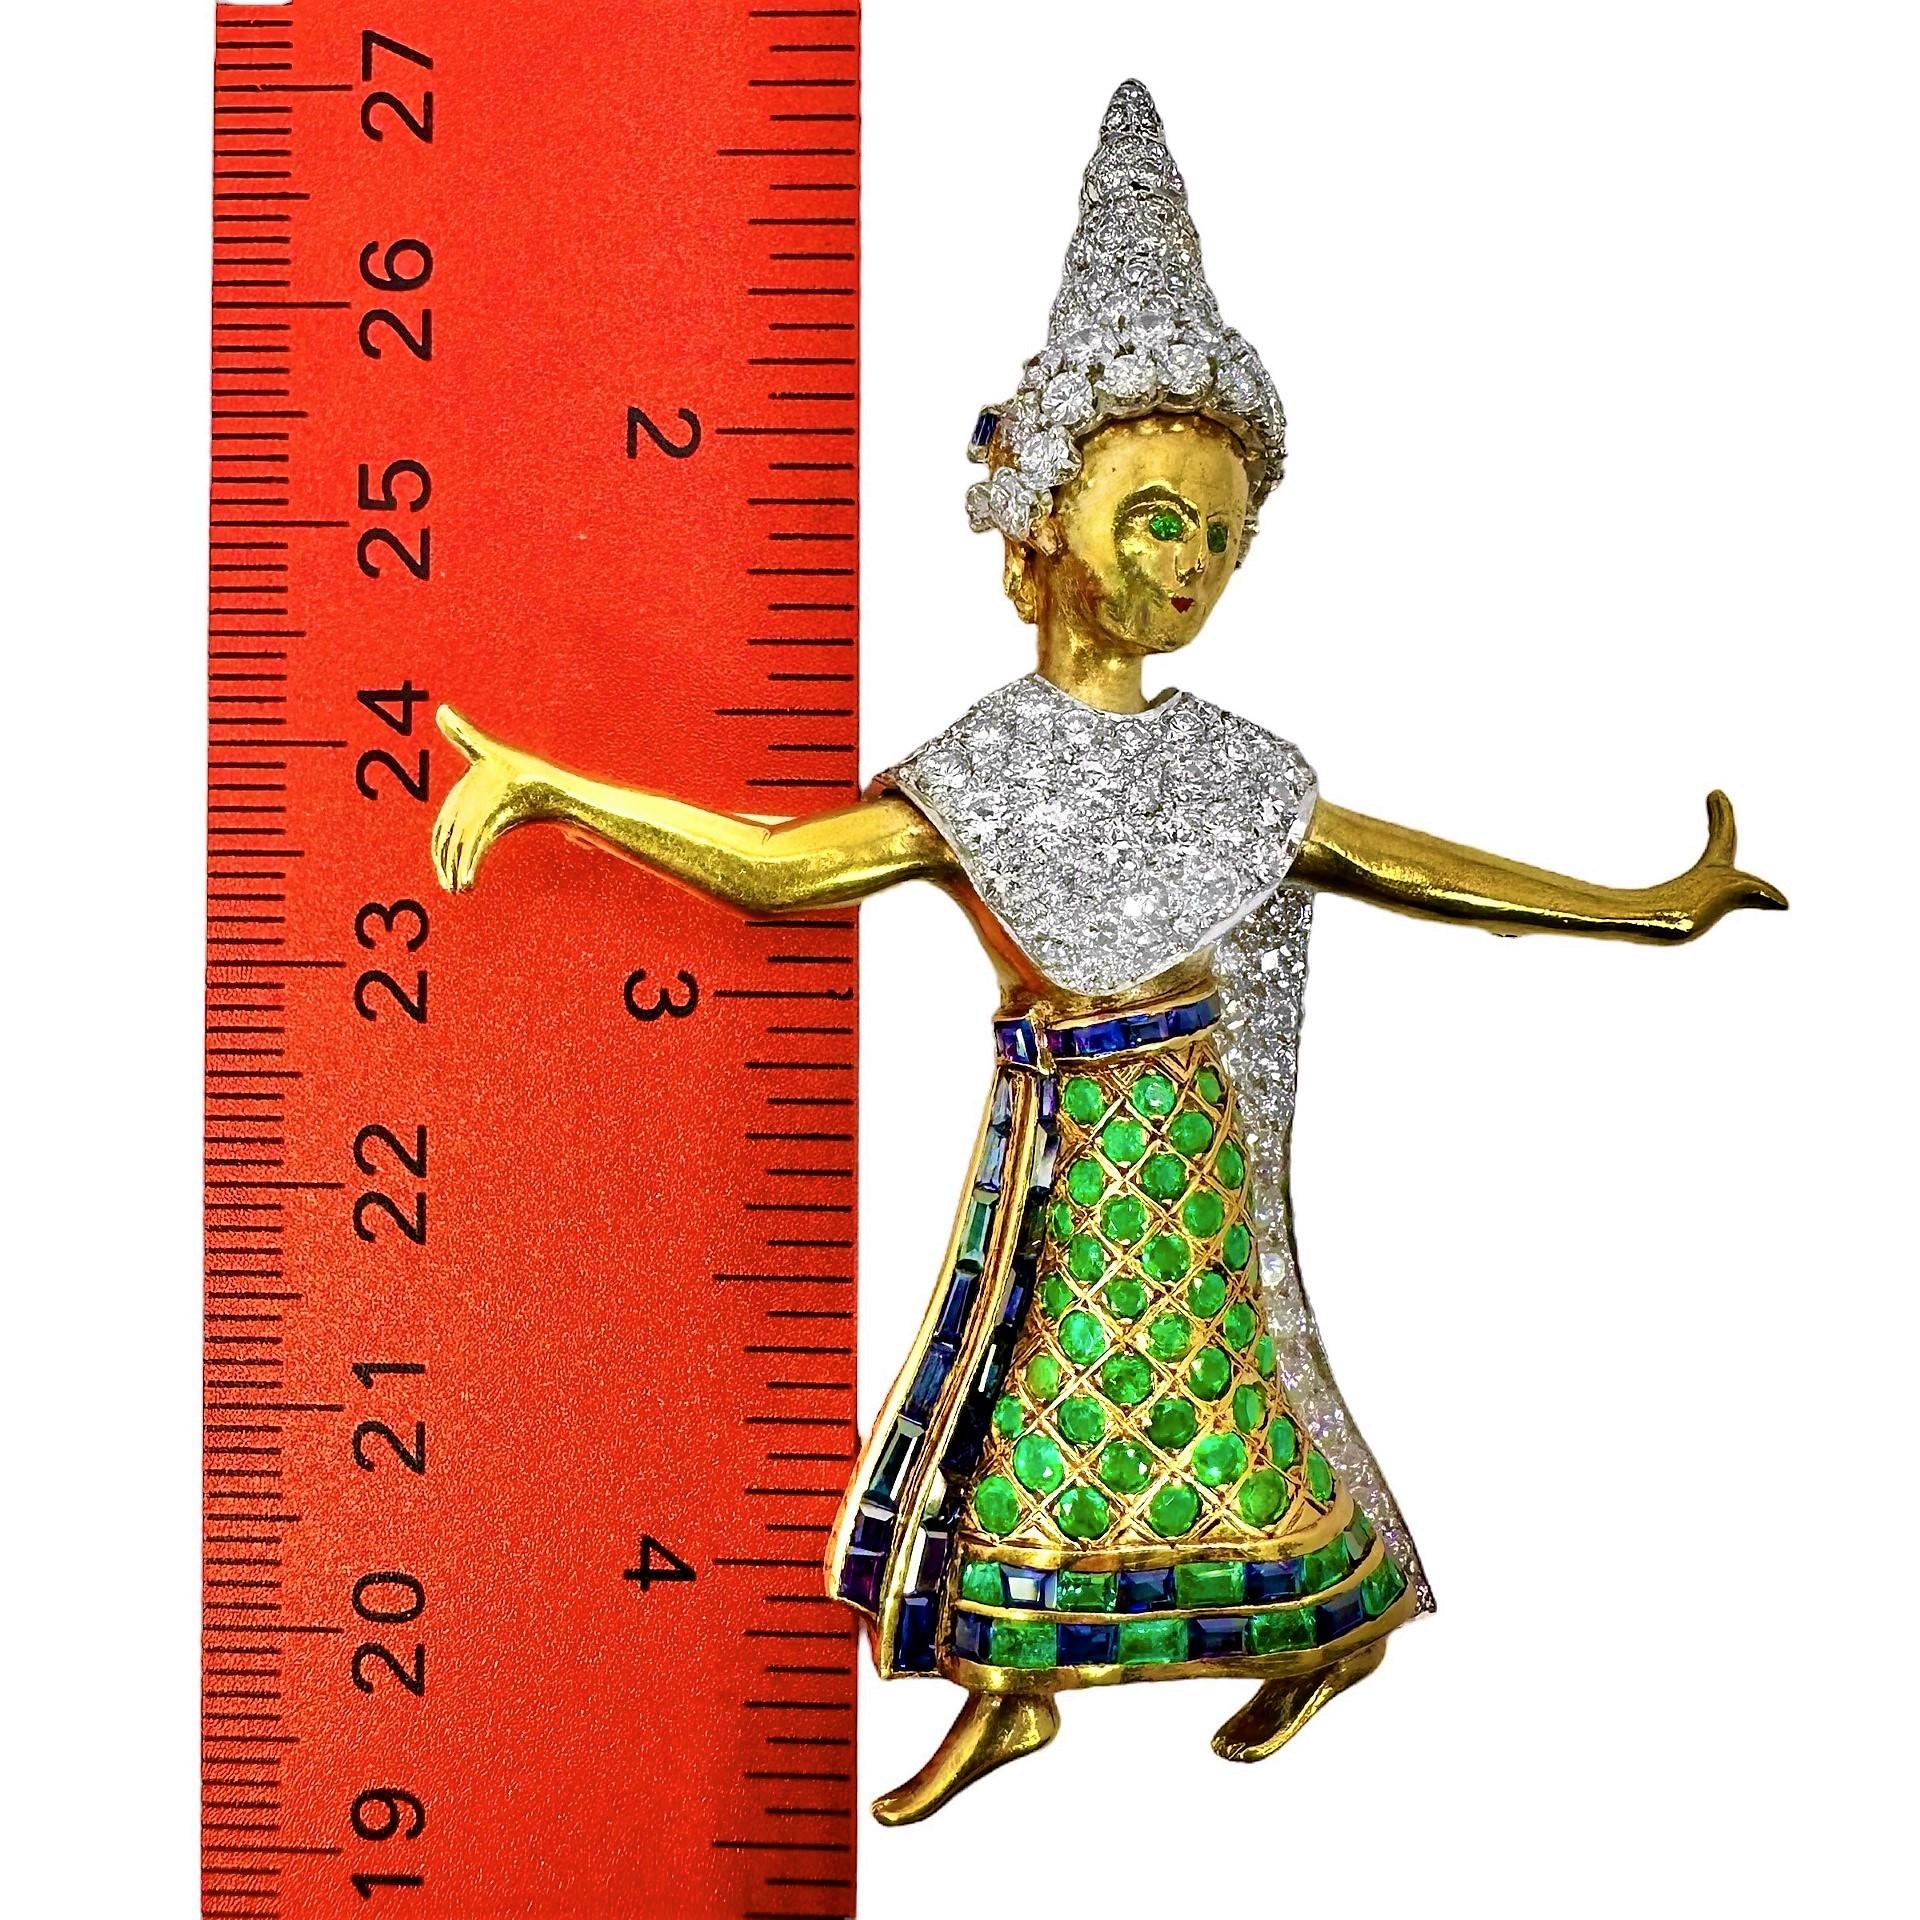 5.11 inches on a ruler